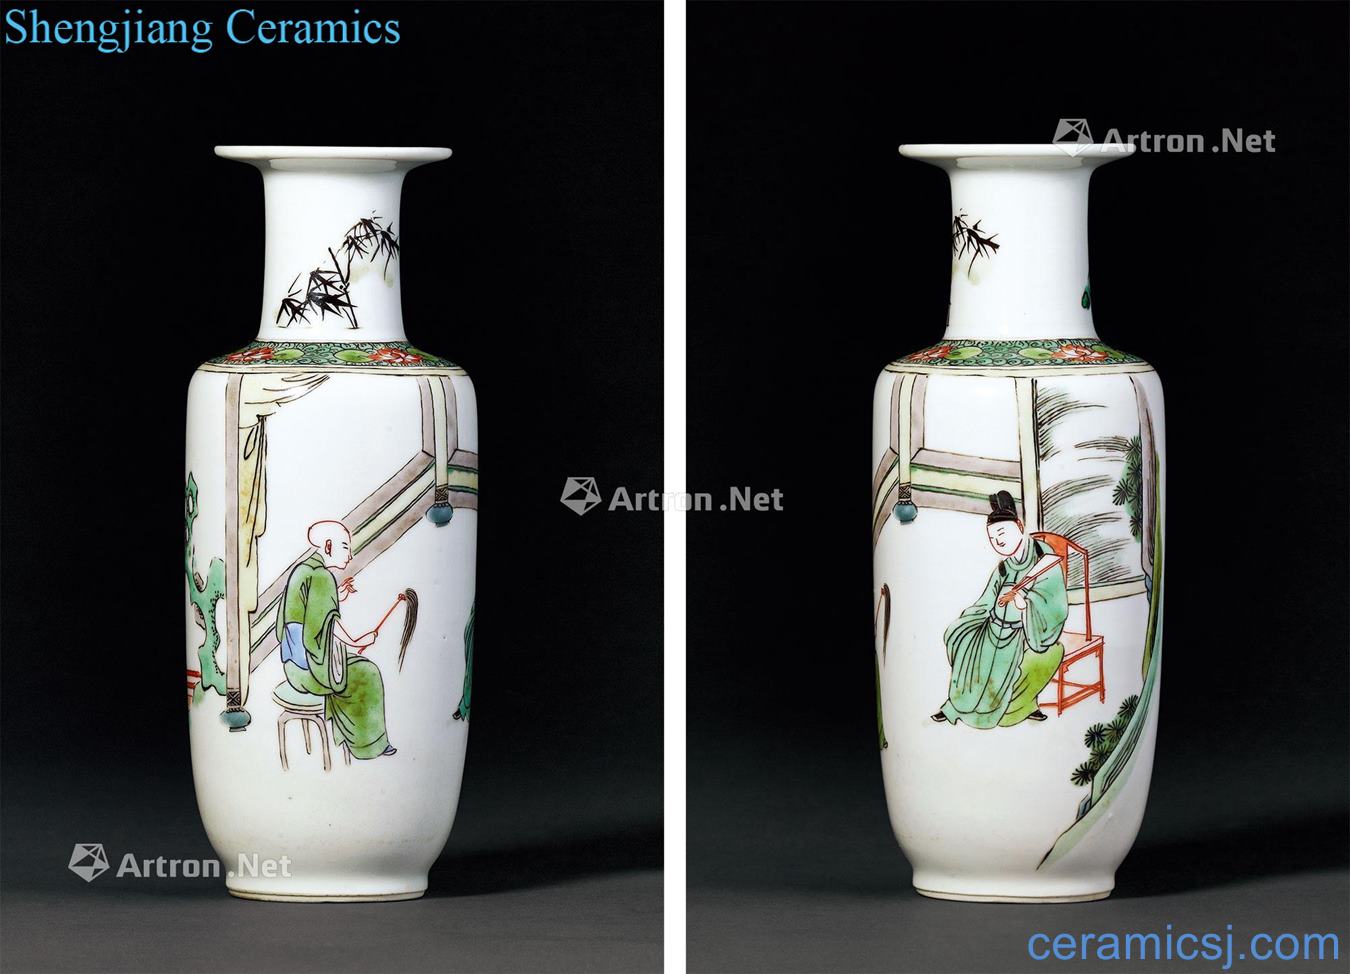 The qing emperor kangxi colorful figure show "the west chamber" story